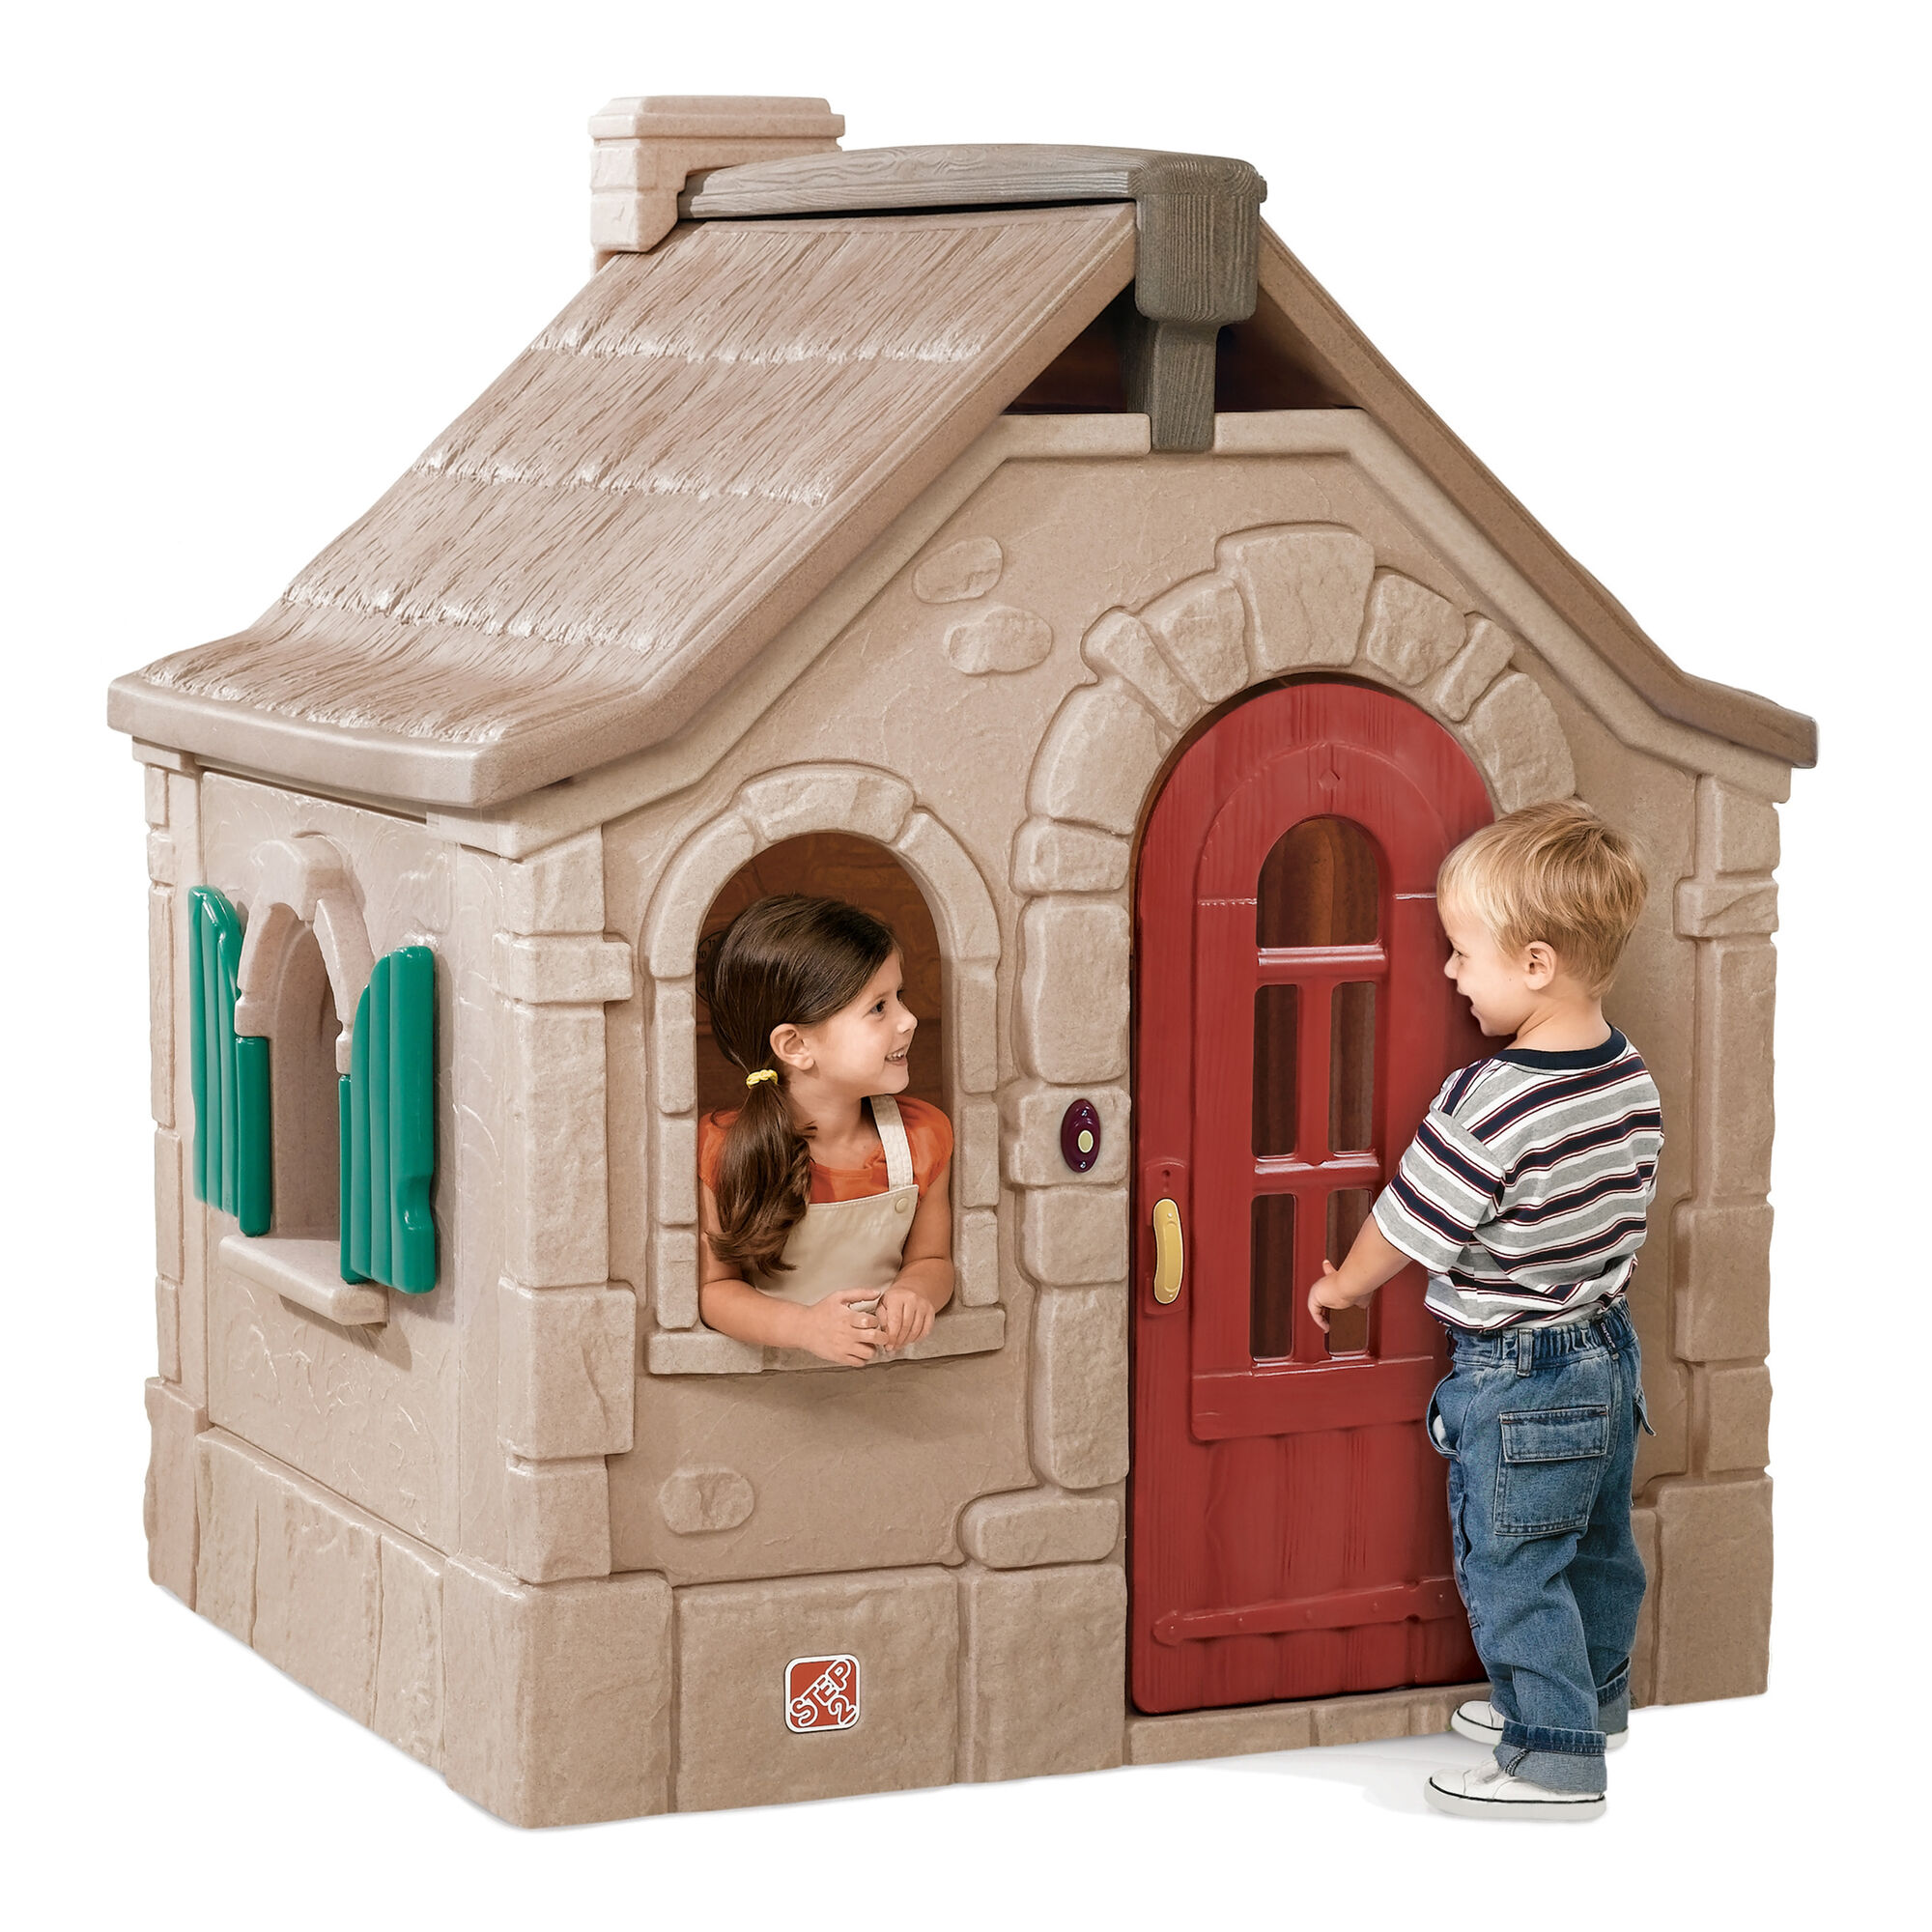 productfoto-mensen Step2 Naturally Playful Storybook Cottage